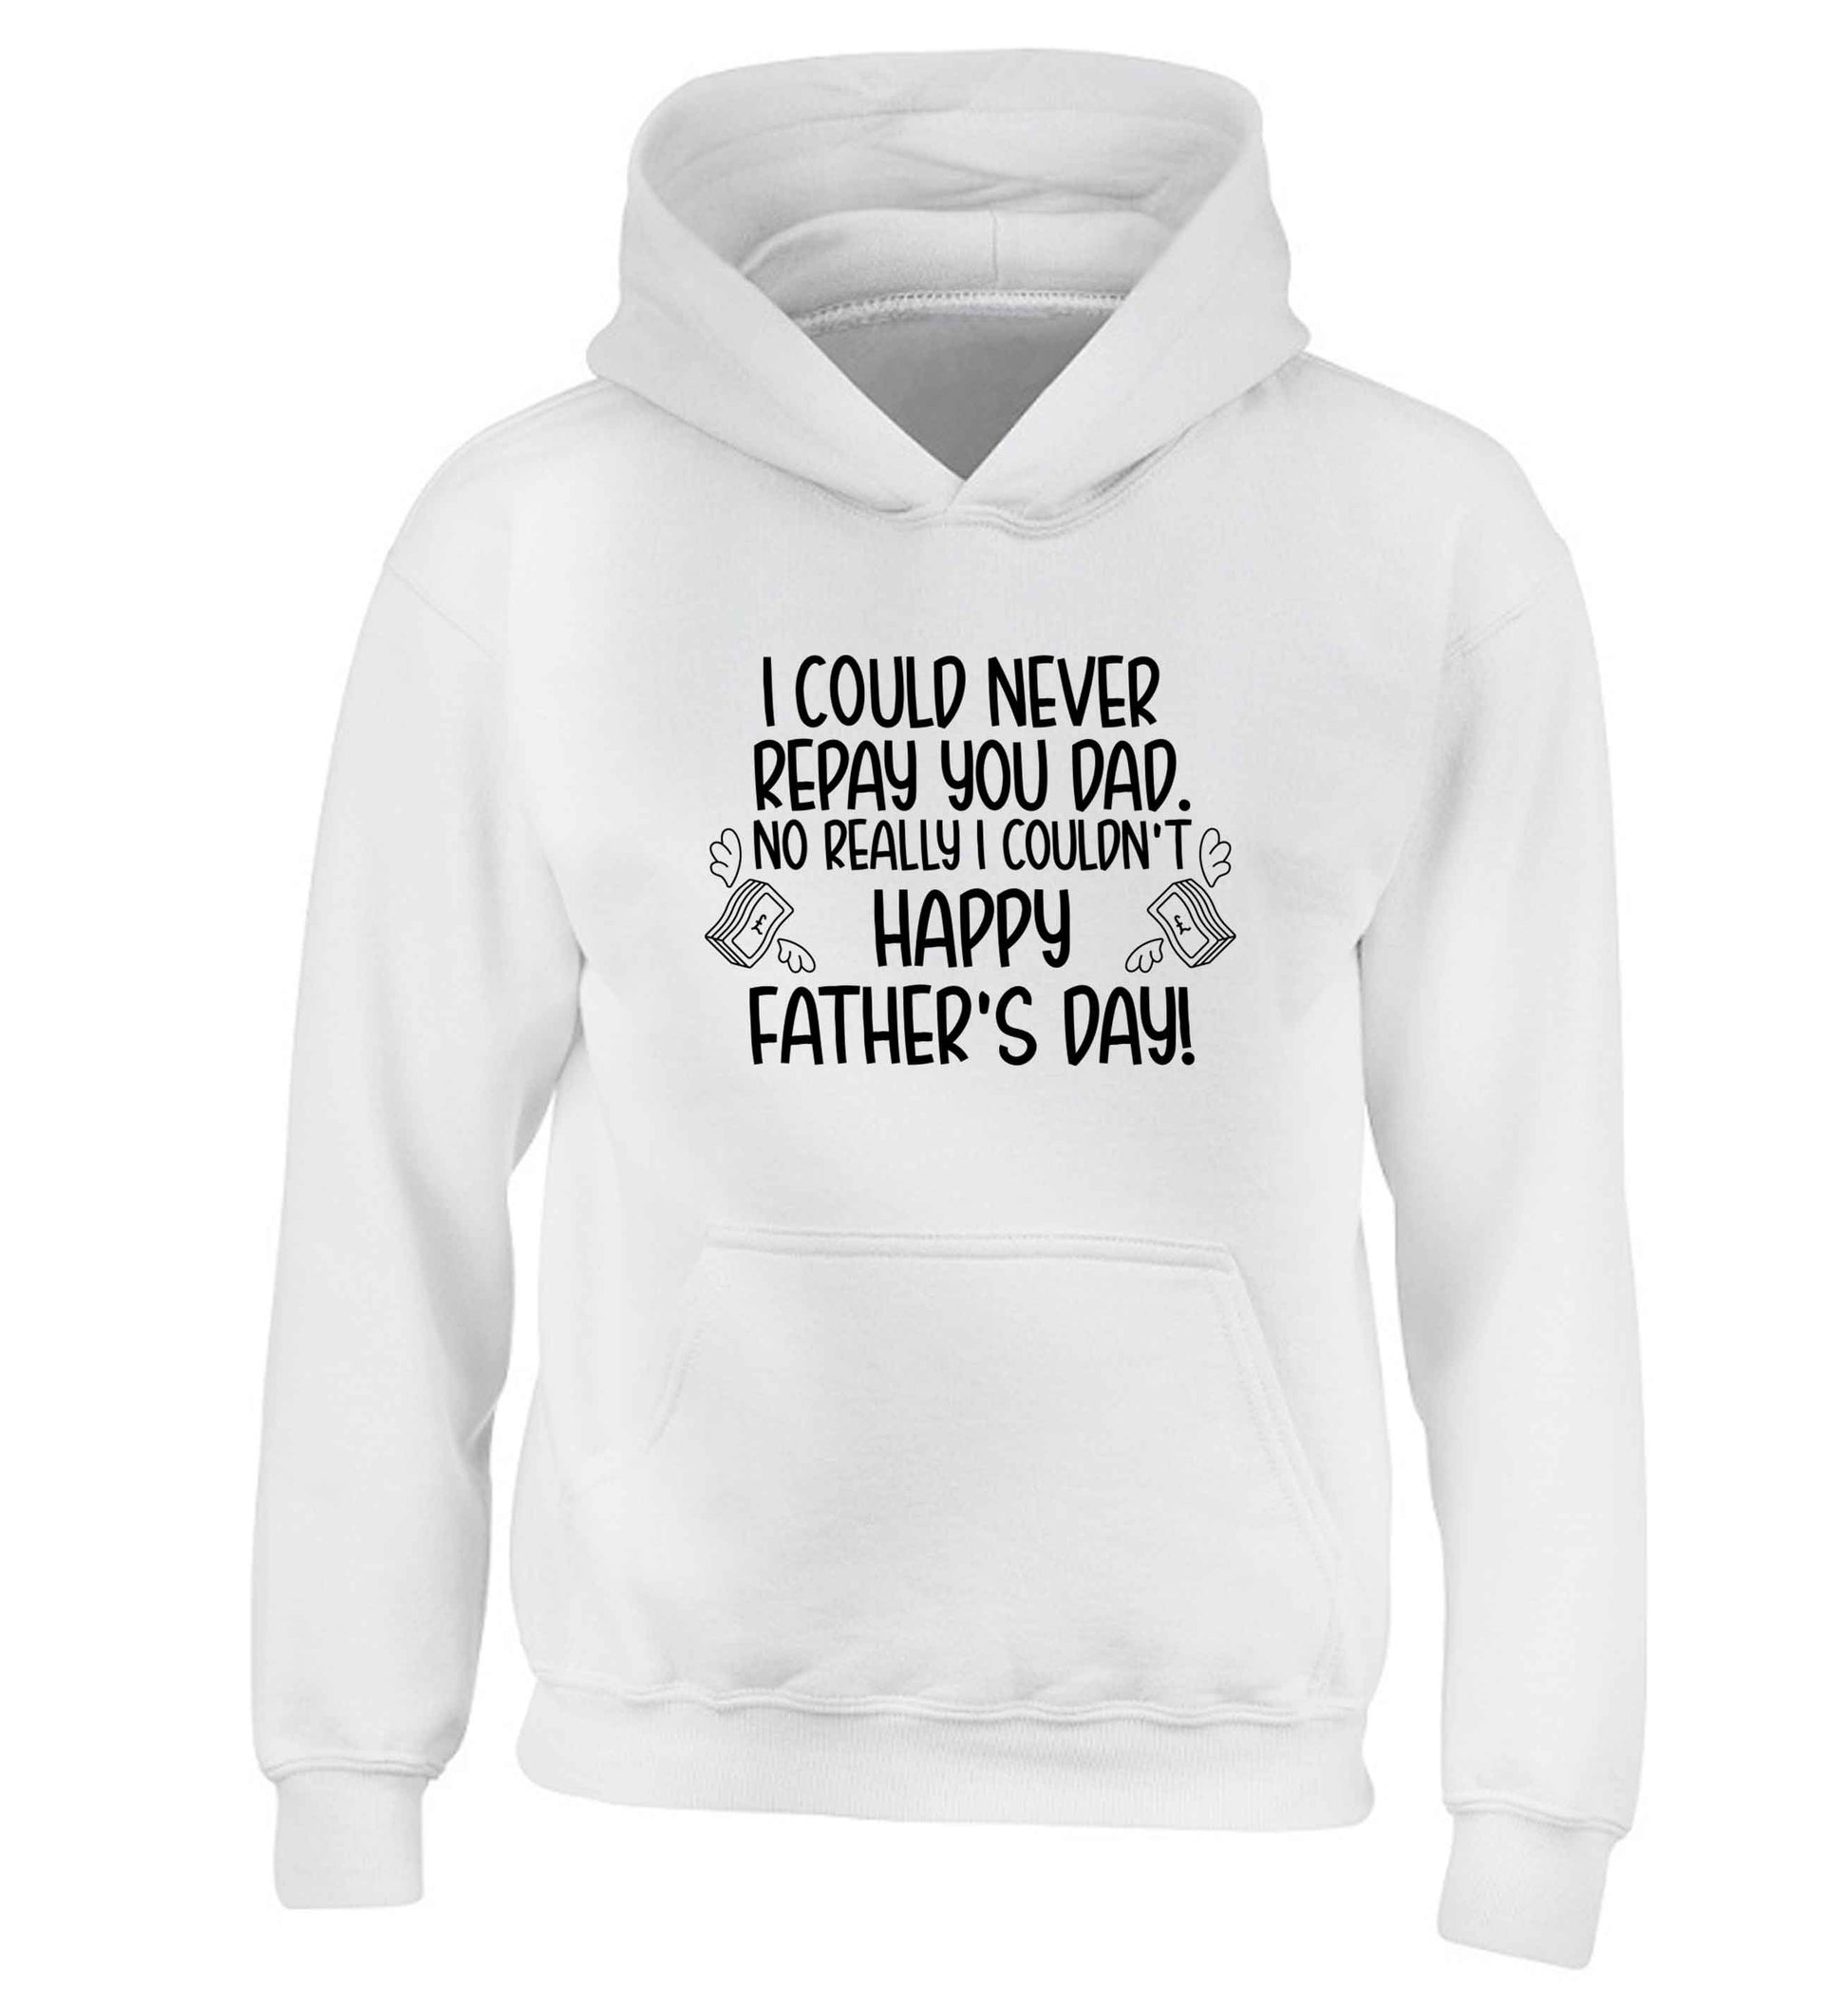 I could never repay you dad. No I really couldn't happy Father's day! children's white hoodie 12-13 Years